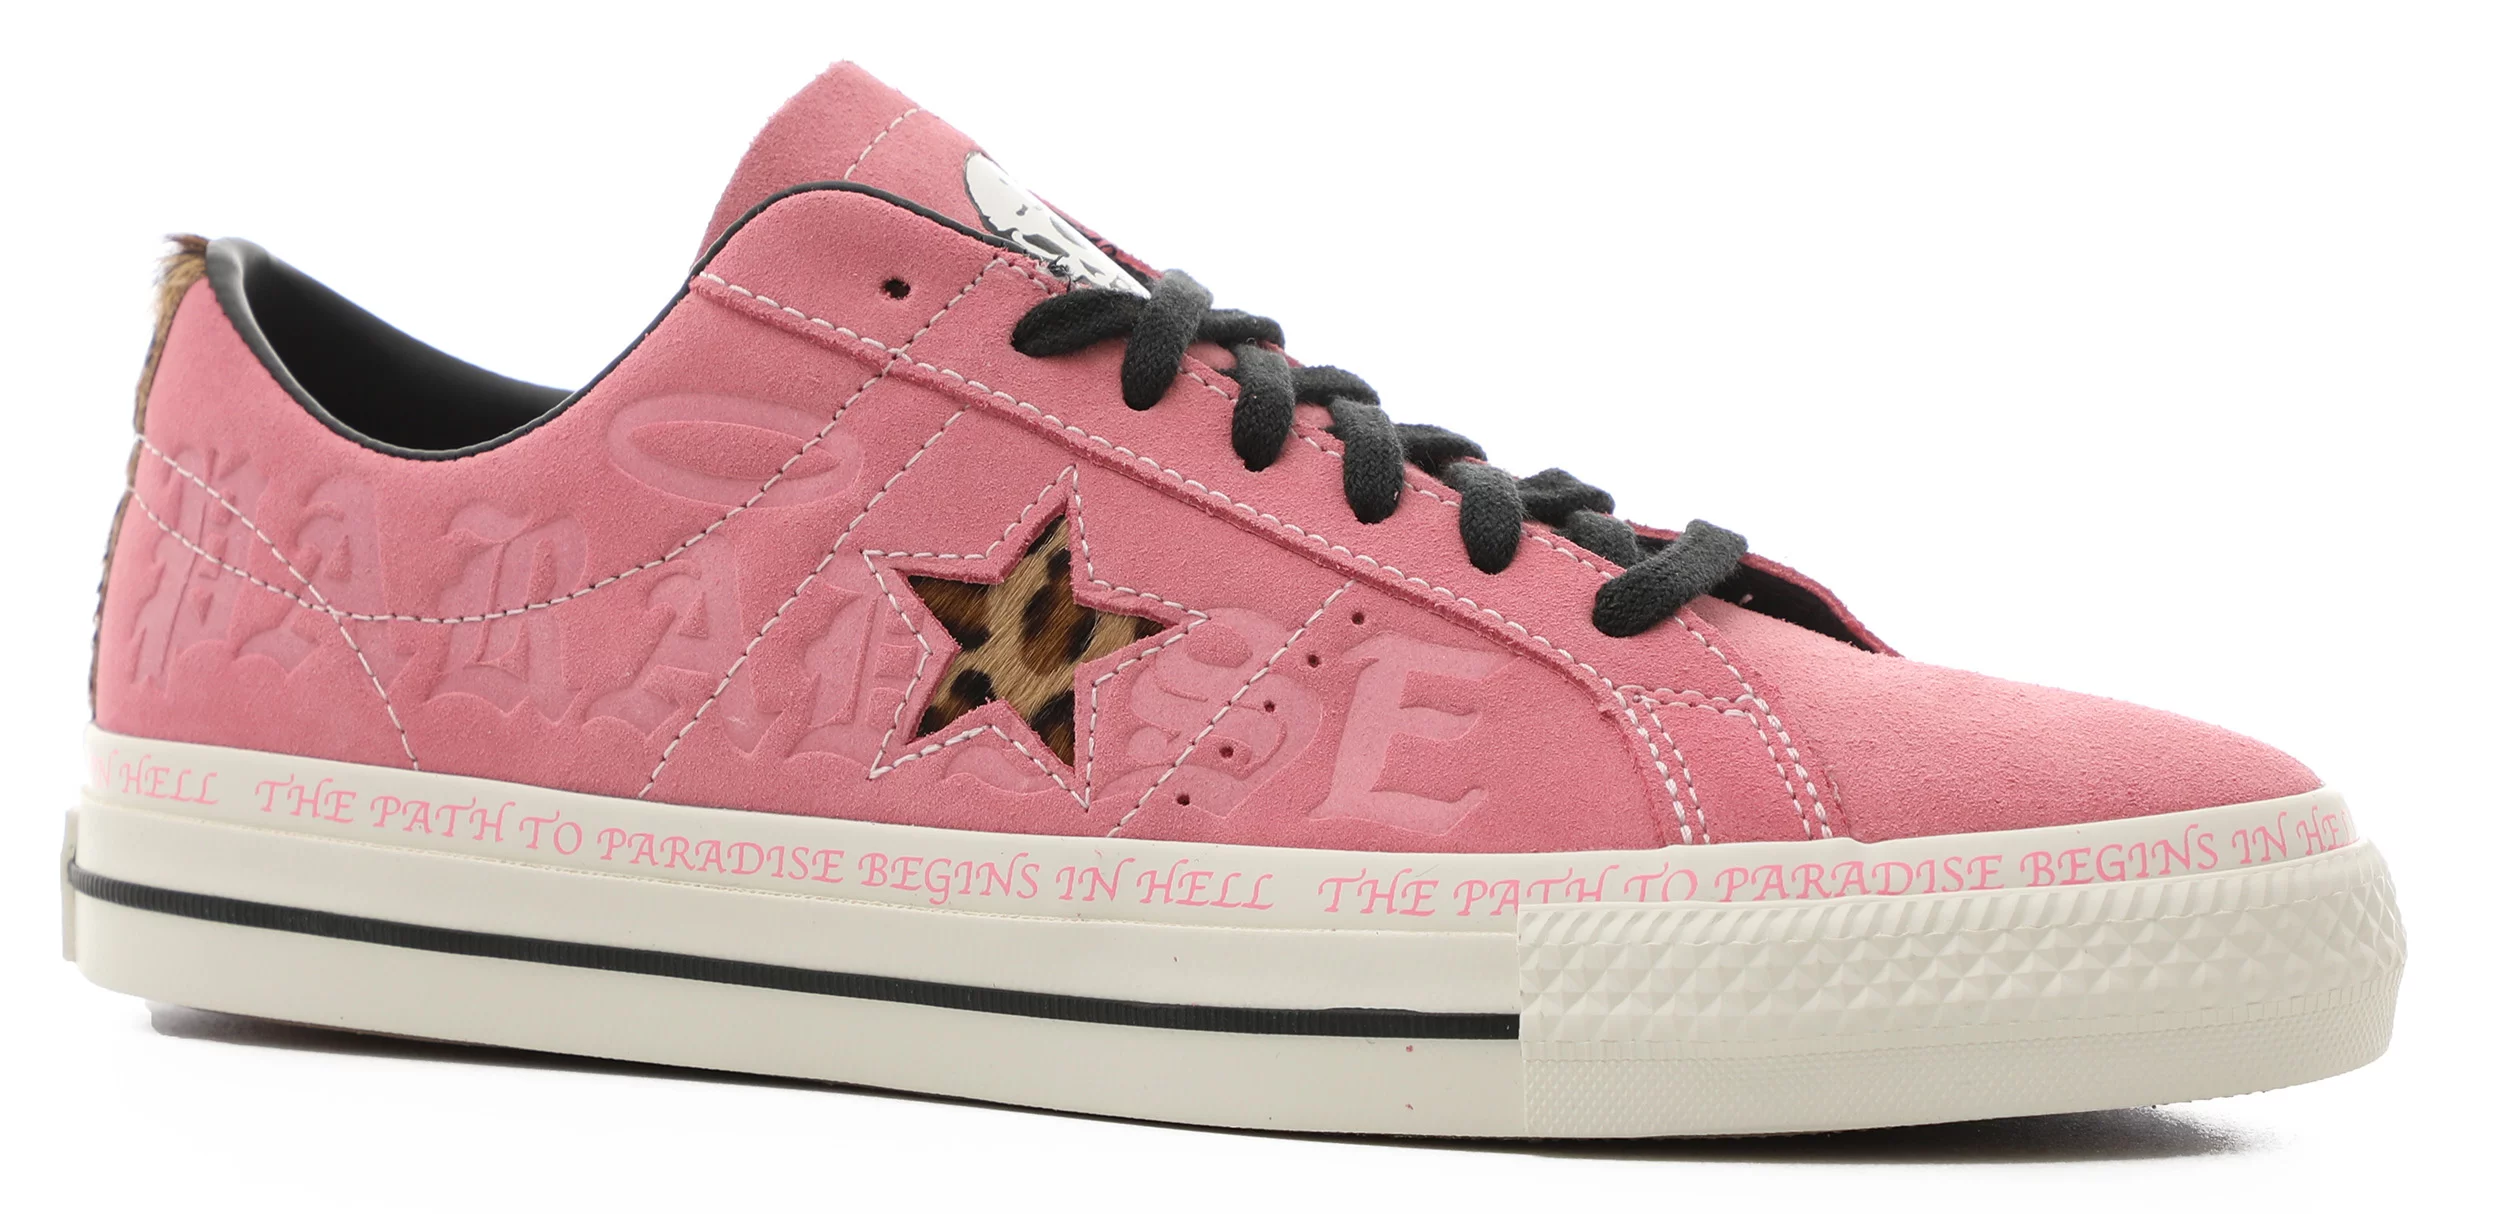 Converse One Pro Skate Free Shipping Tactics